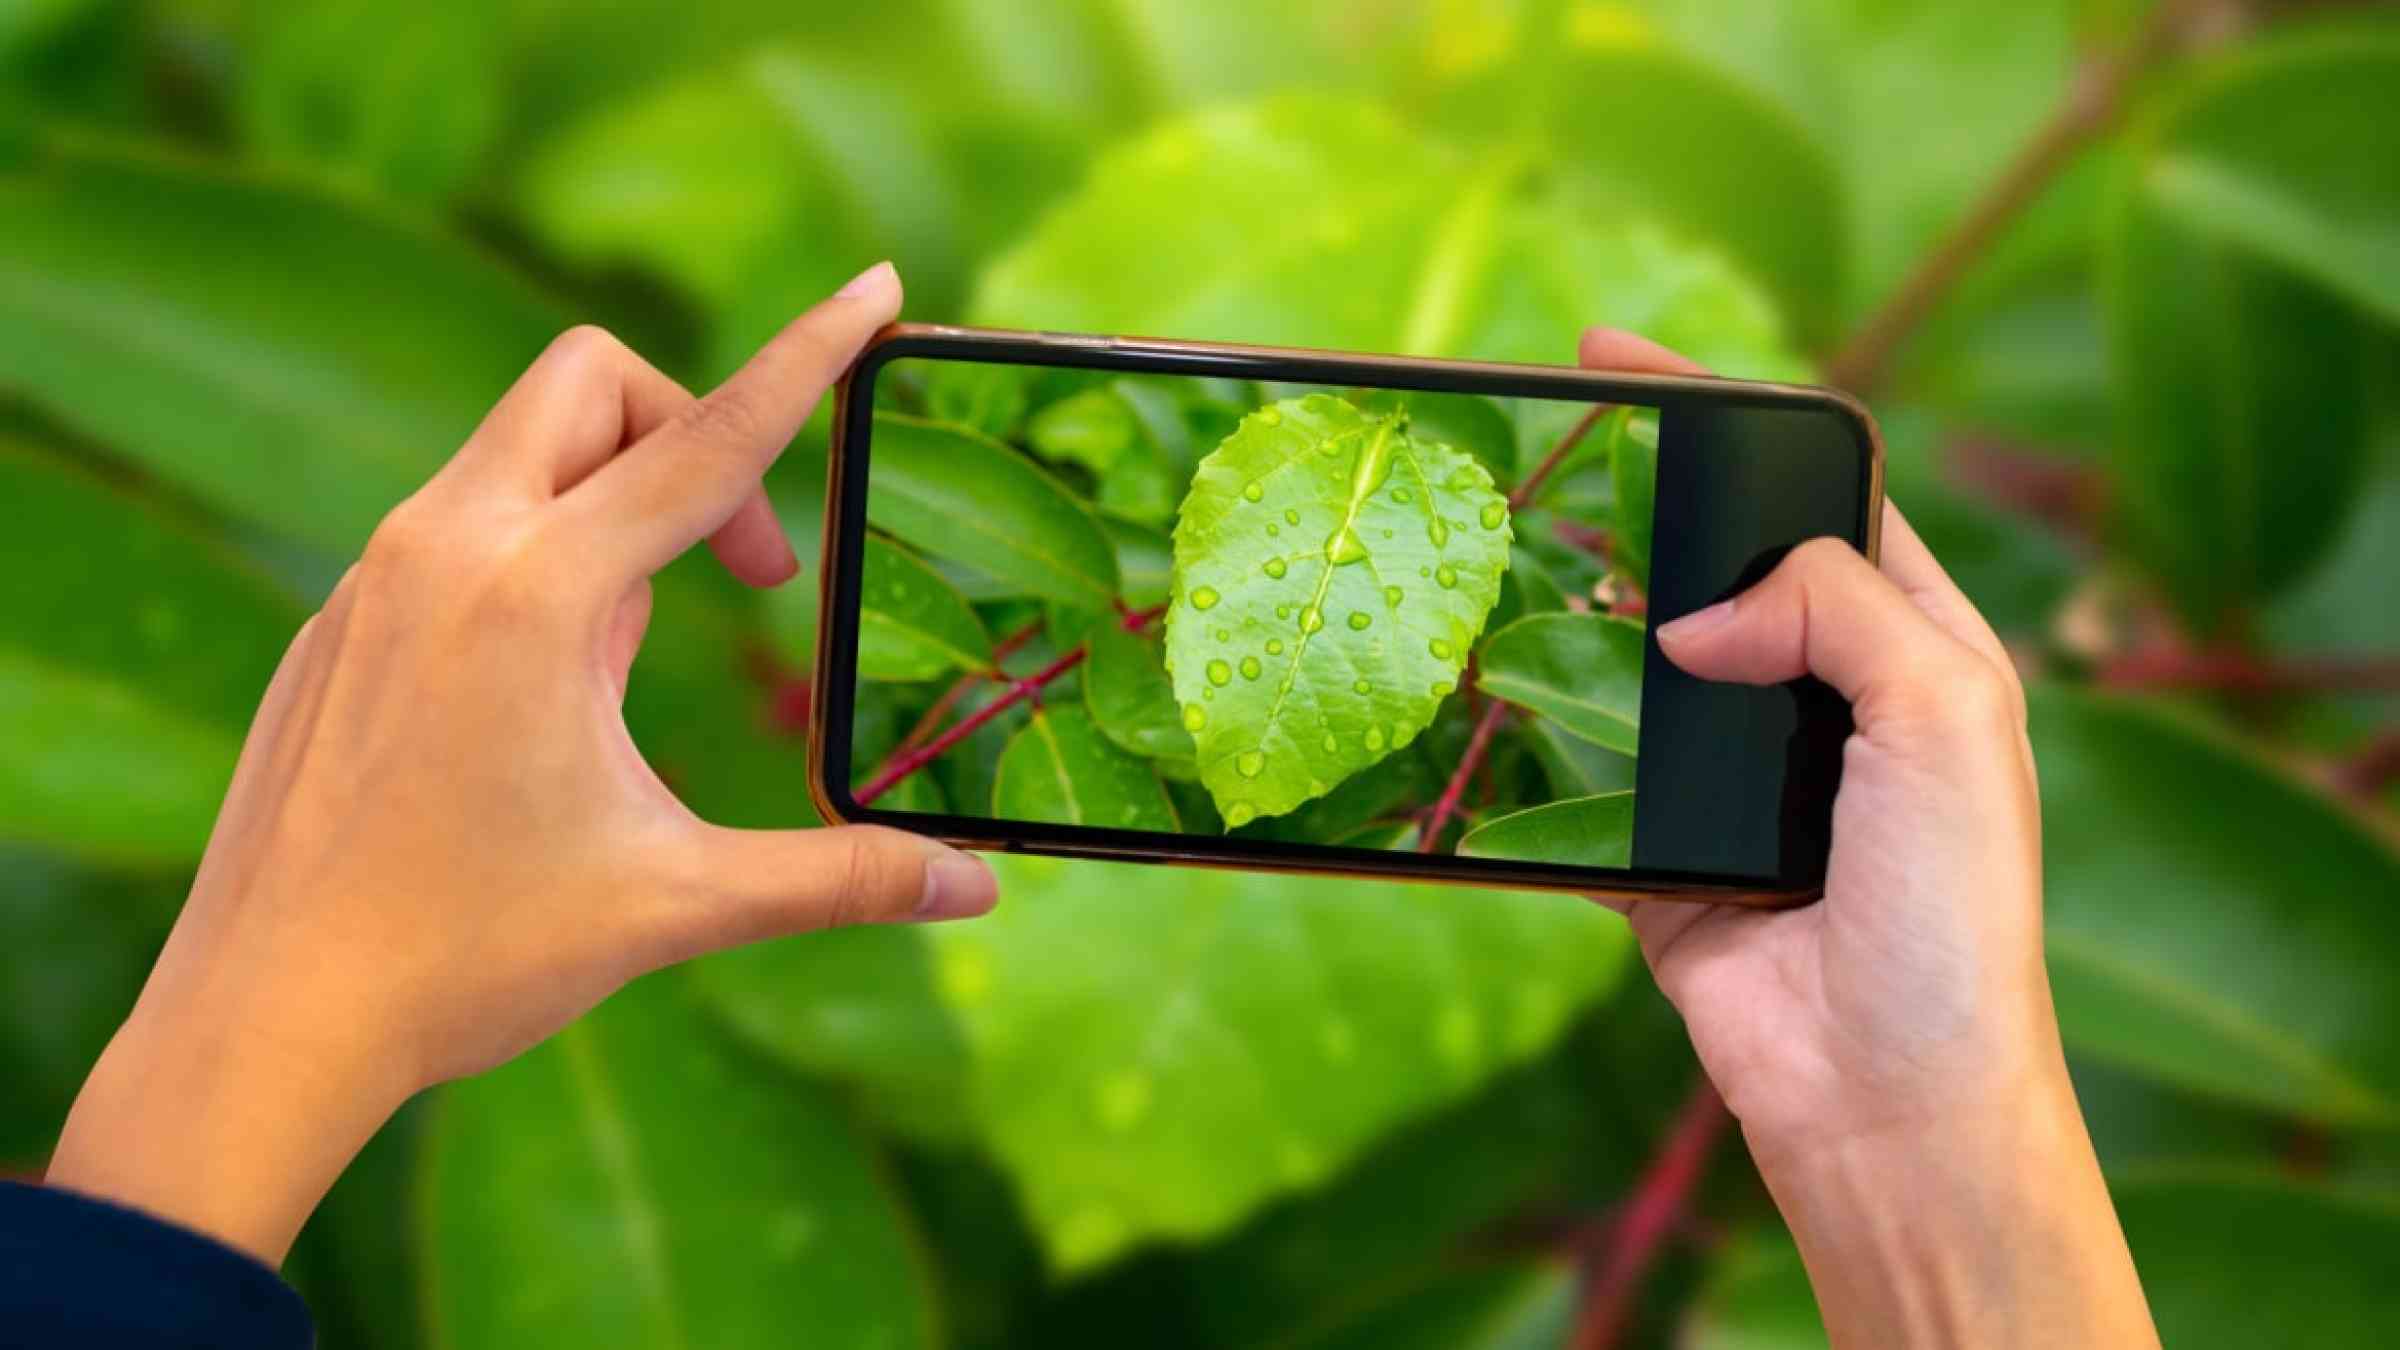 A person is taking a photograph on their phone of a plant.